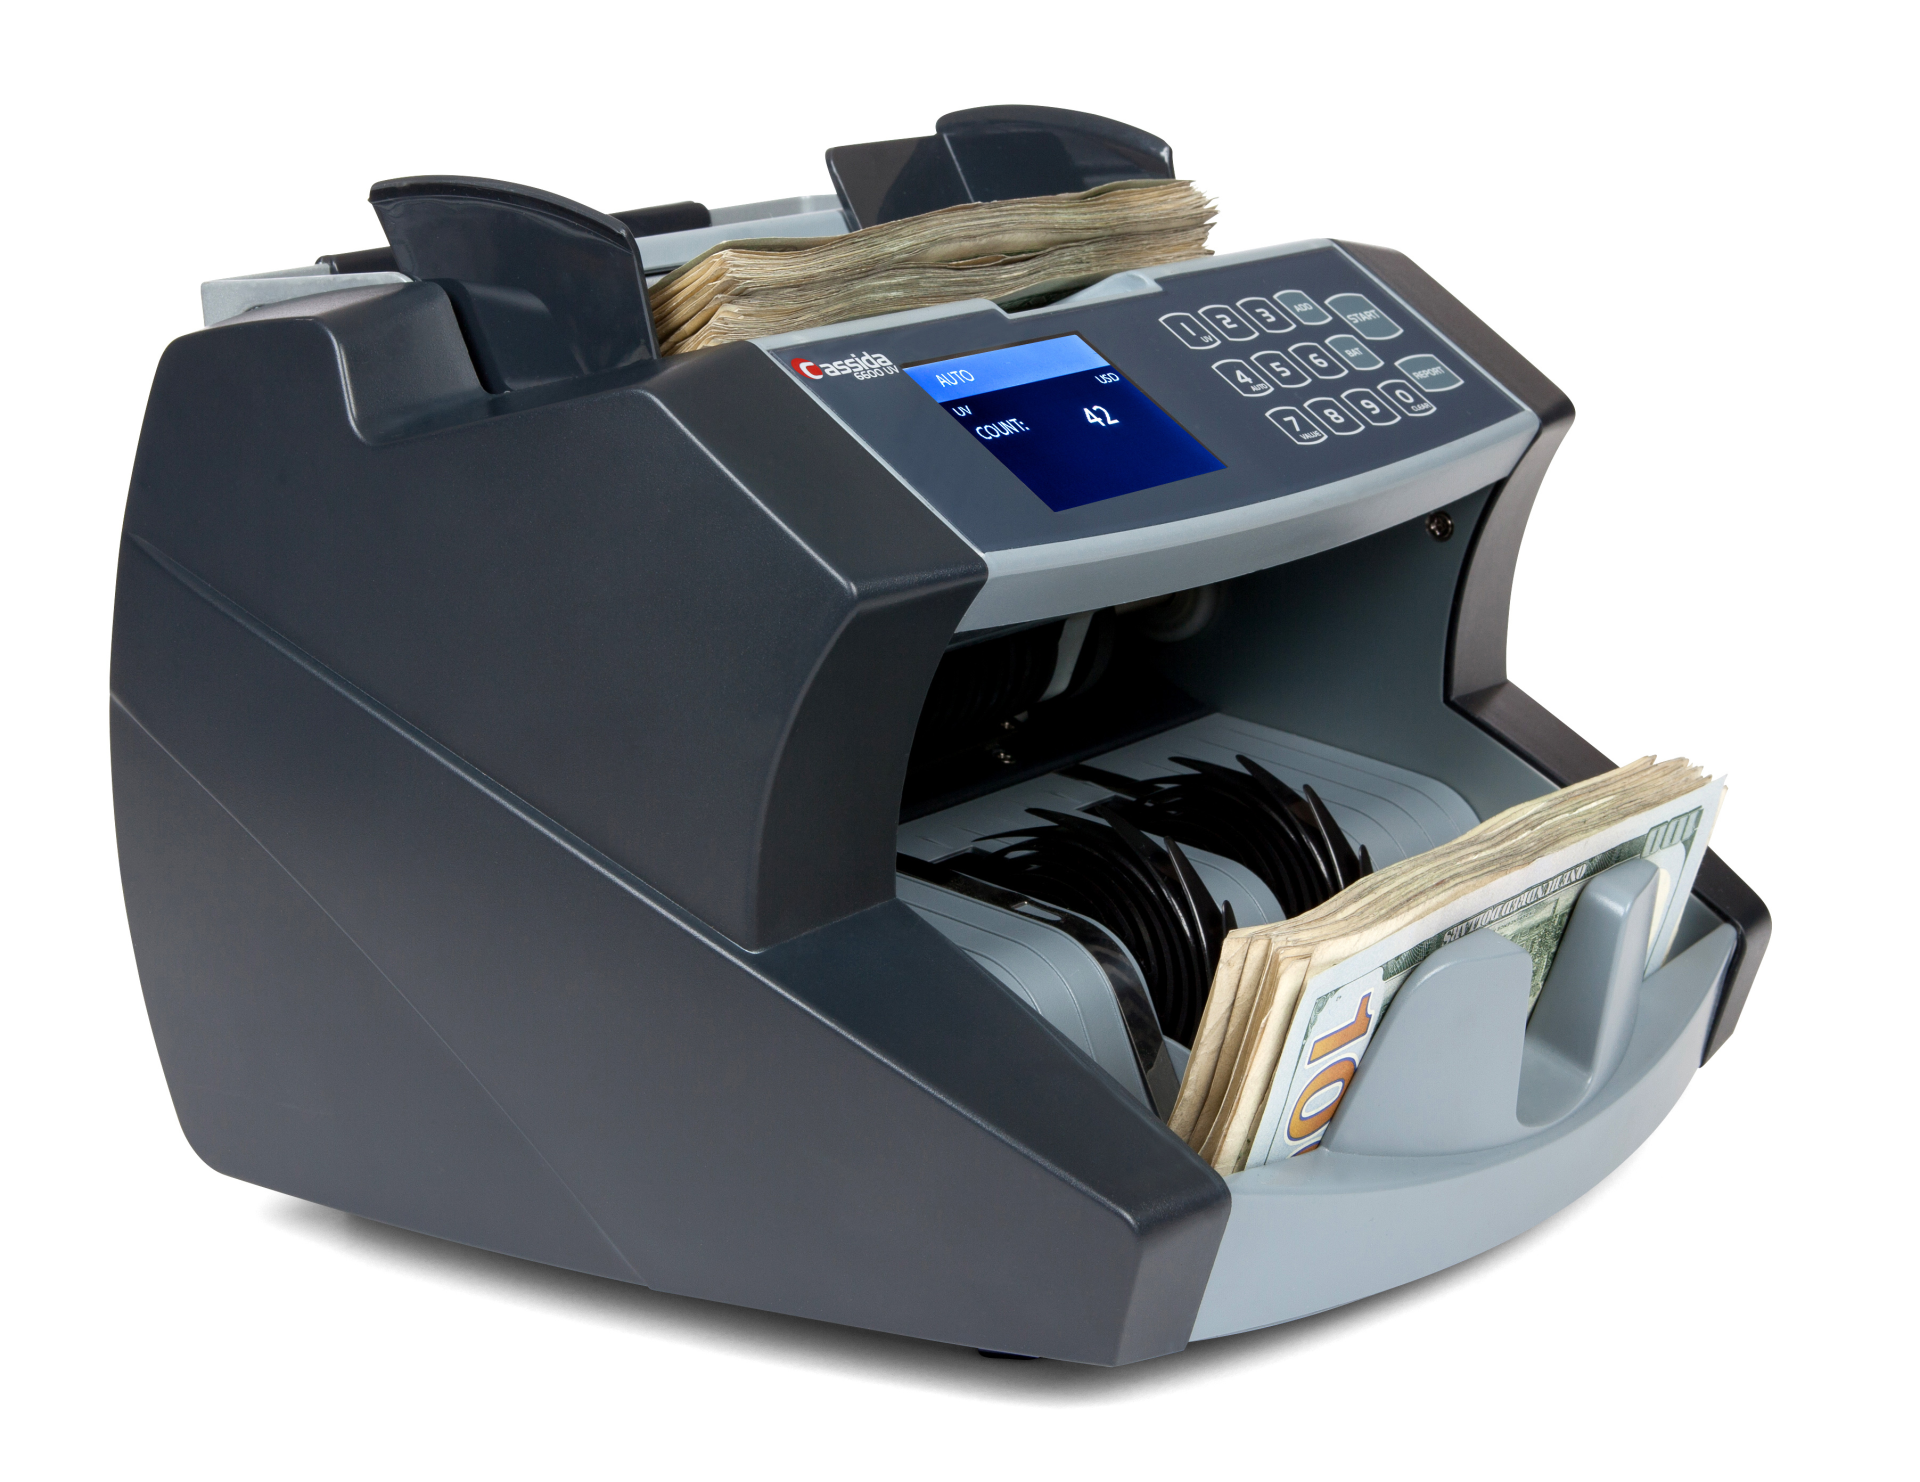 Klopp Model CEB: Electric“One-Coin”Counter-Bagger